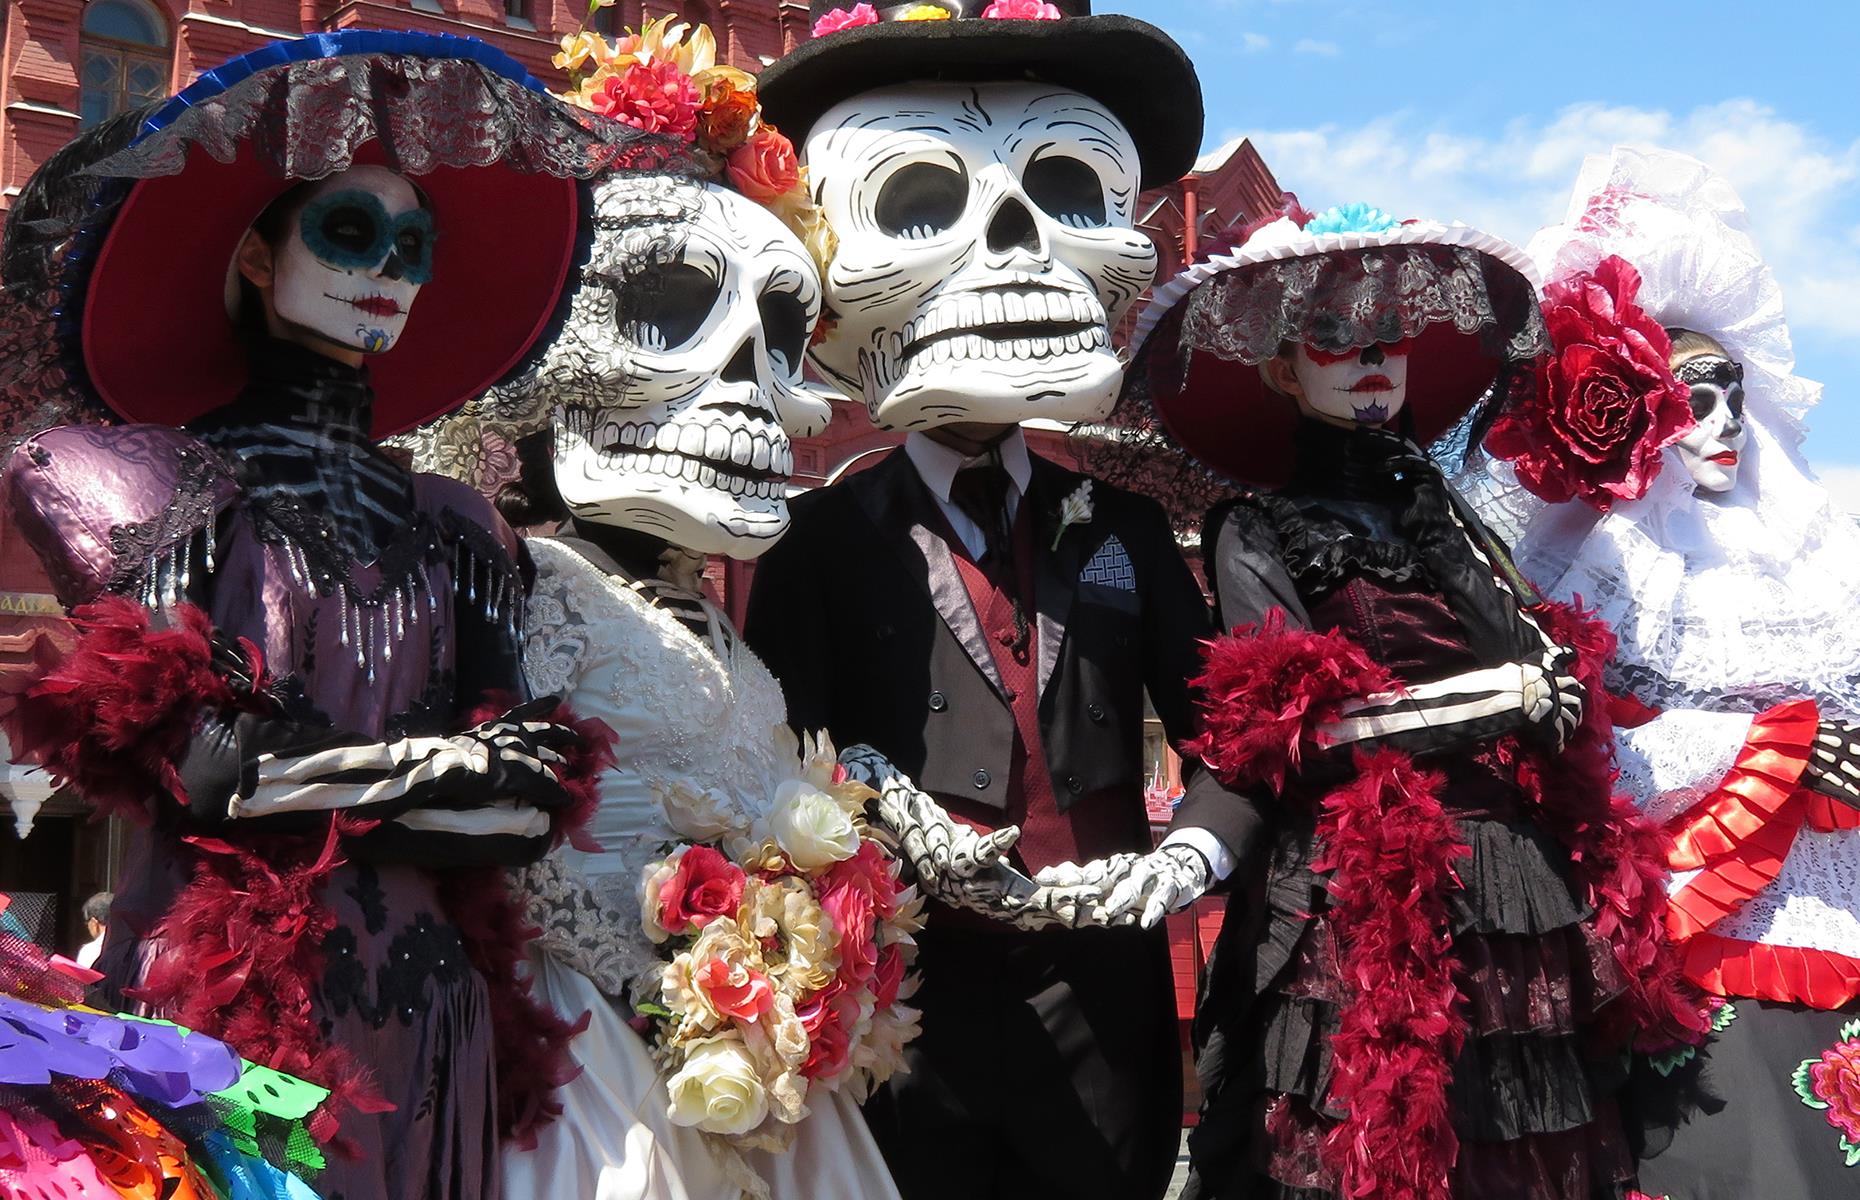 This famous Mexican festival celebrates the ones we love who have passed on. Thousands of people attend the Day of the Dead parade in Mexico City, faces painted with sugar skull designs and dressed as La Calavera Catrina – the embodiment of Death.